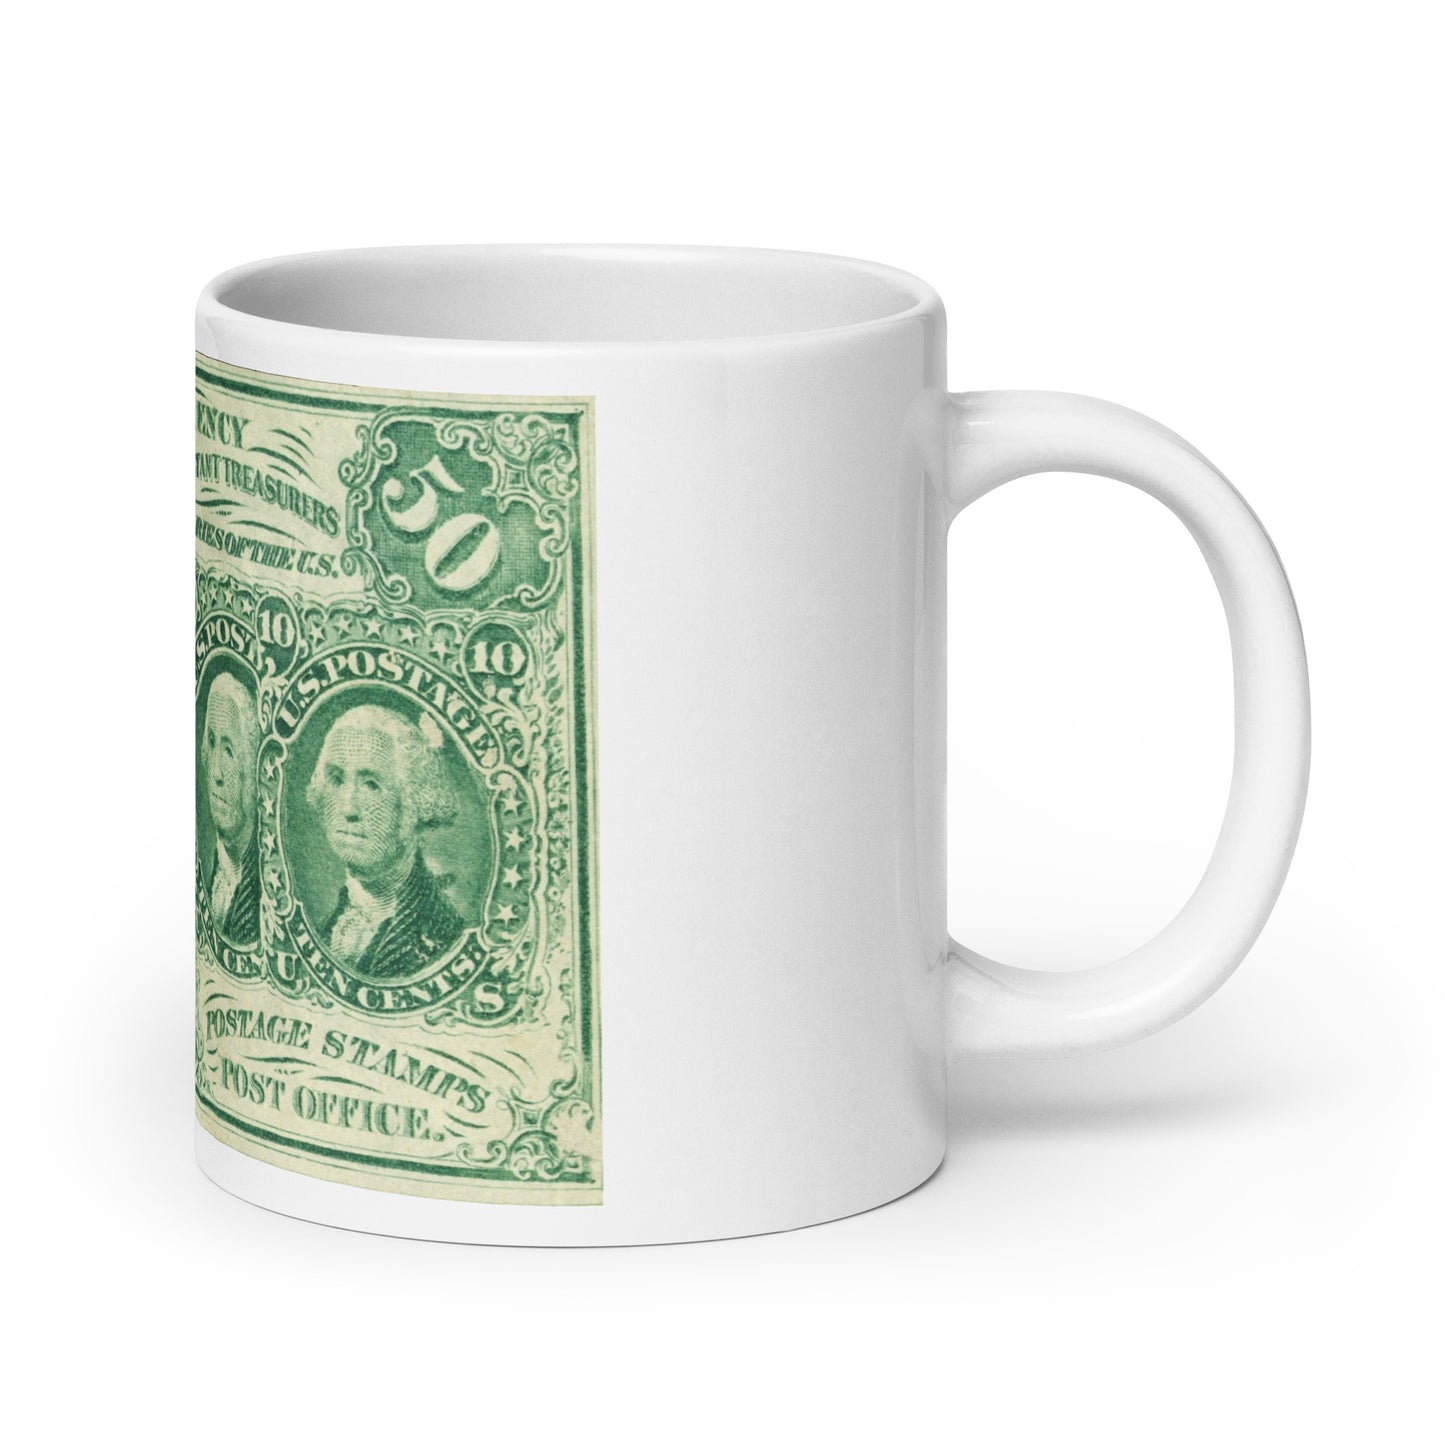 50 Cents 1ST Issue Fractional Currency Edition - Classic Currency Collector's Mug